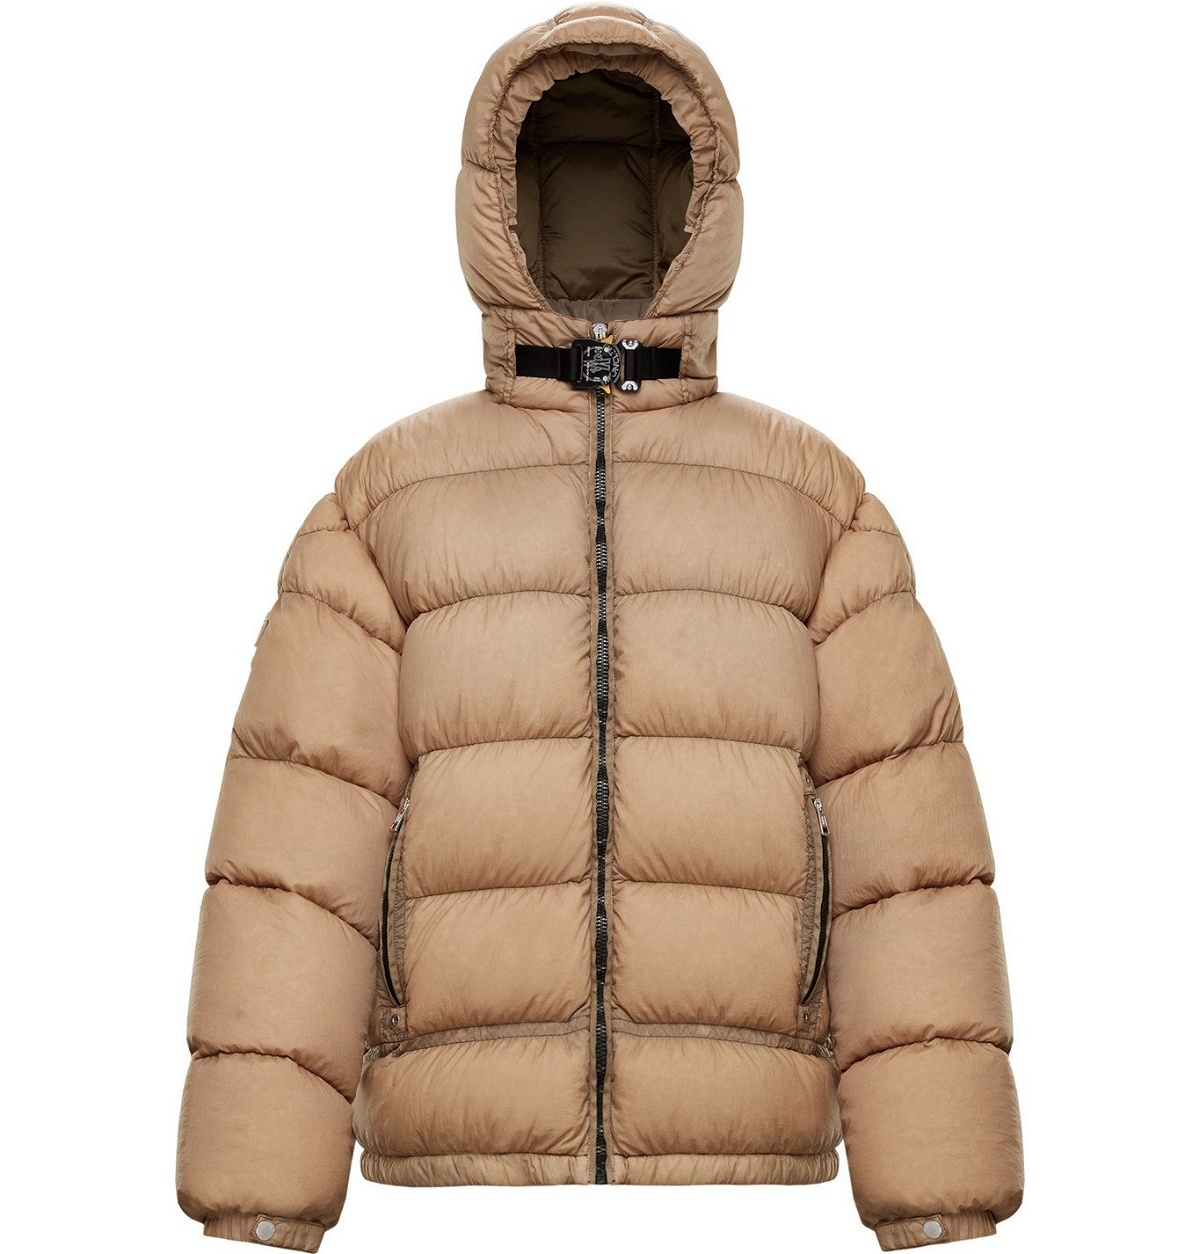 Moncler Genius - 6 Moncler 1017 ALYX 9SM Quilted Nylon Hooded Down 